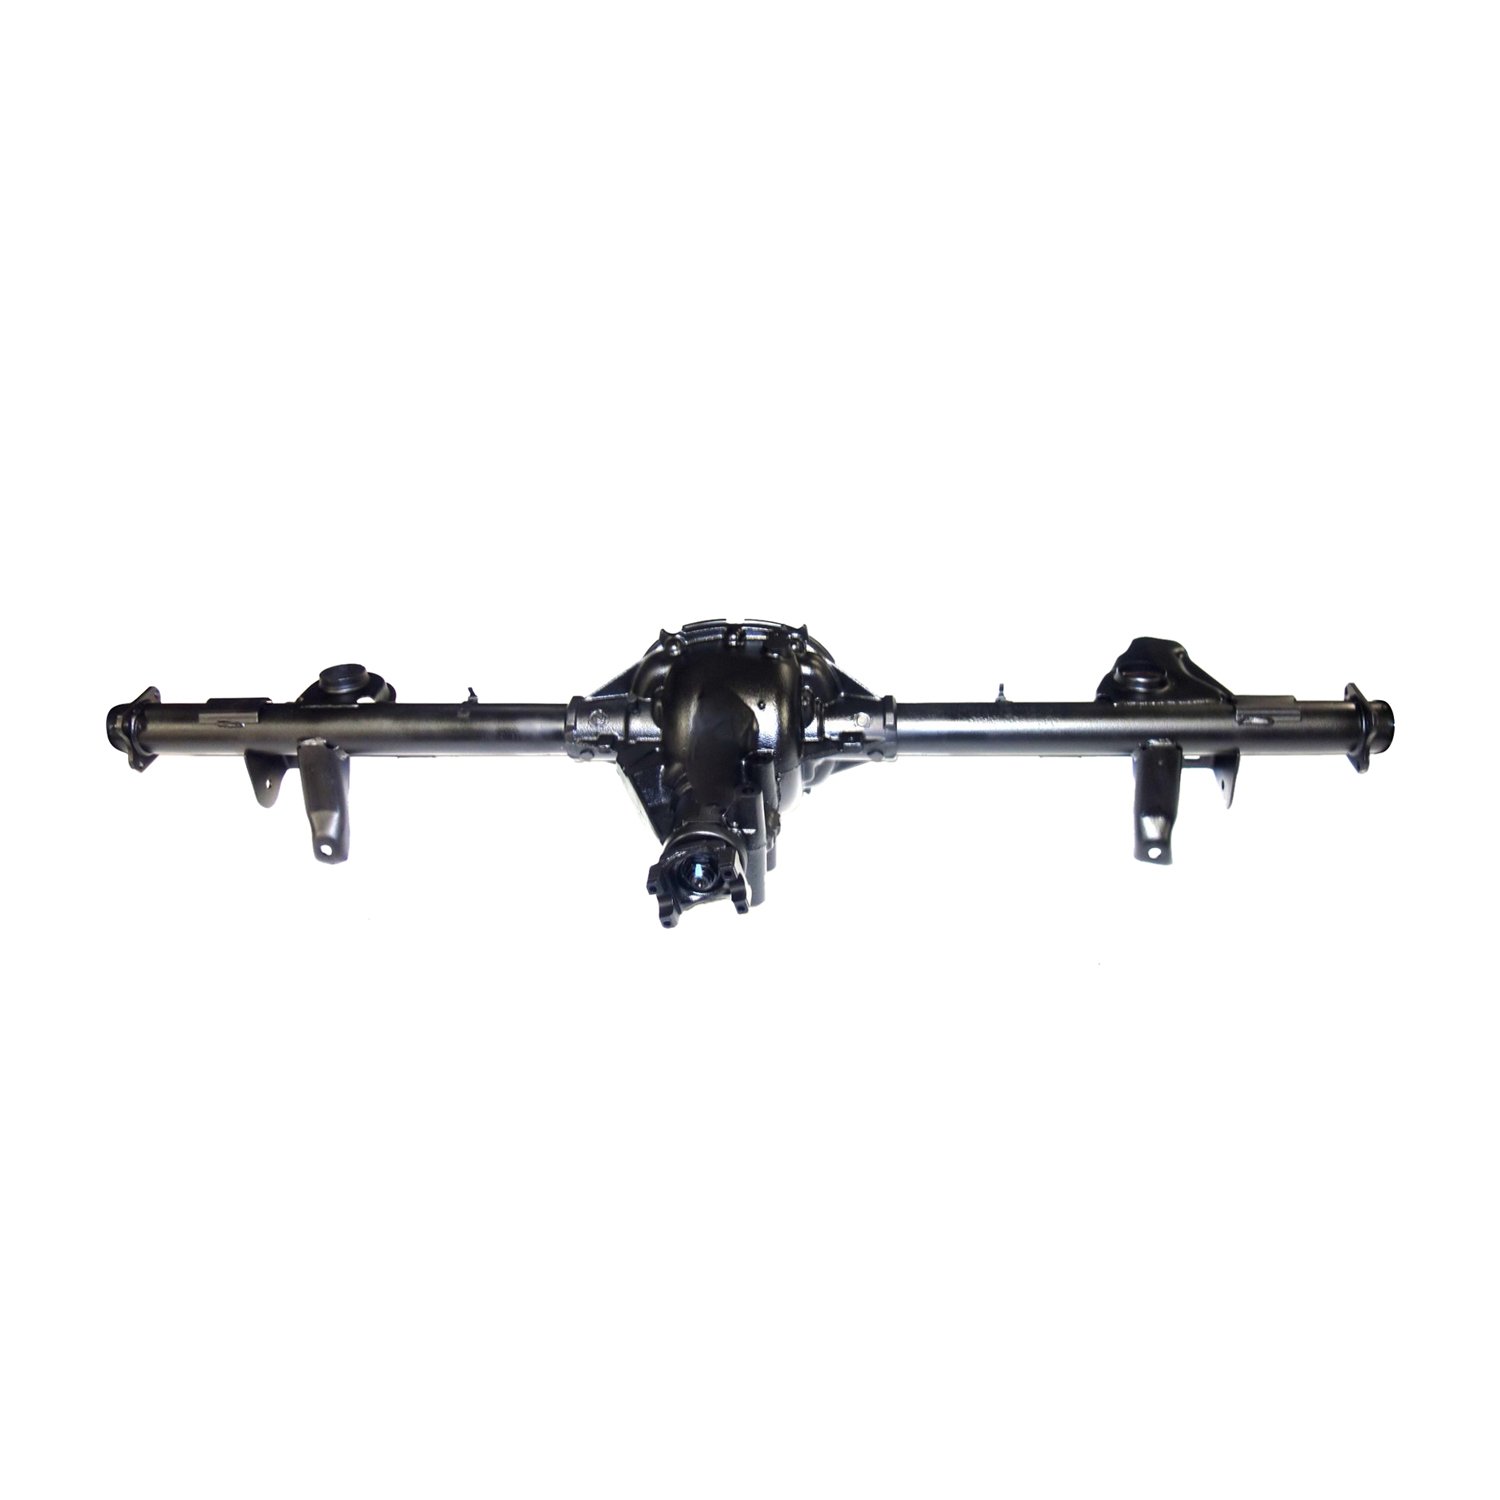 Remanufactured Axle Assy for GM 7.5" 98-03 S10 & S15 3.08 , 2wd, Chassis Pkg, Posi LSD